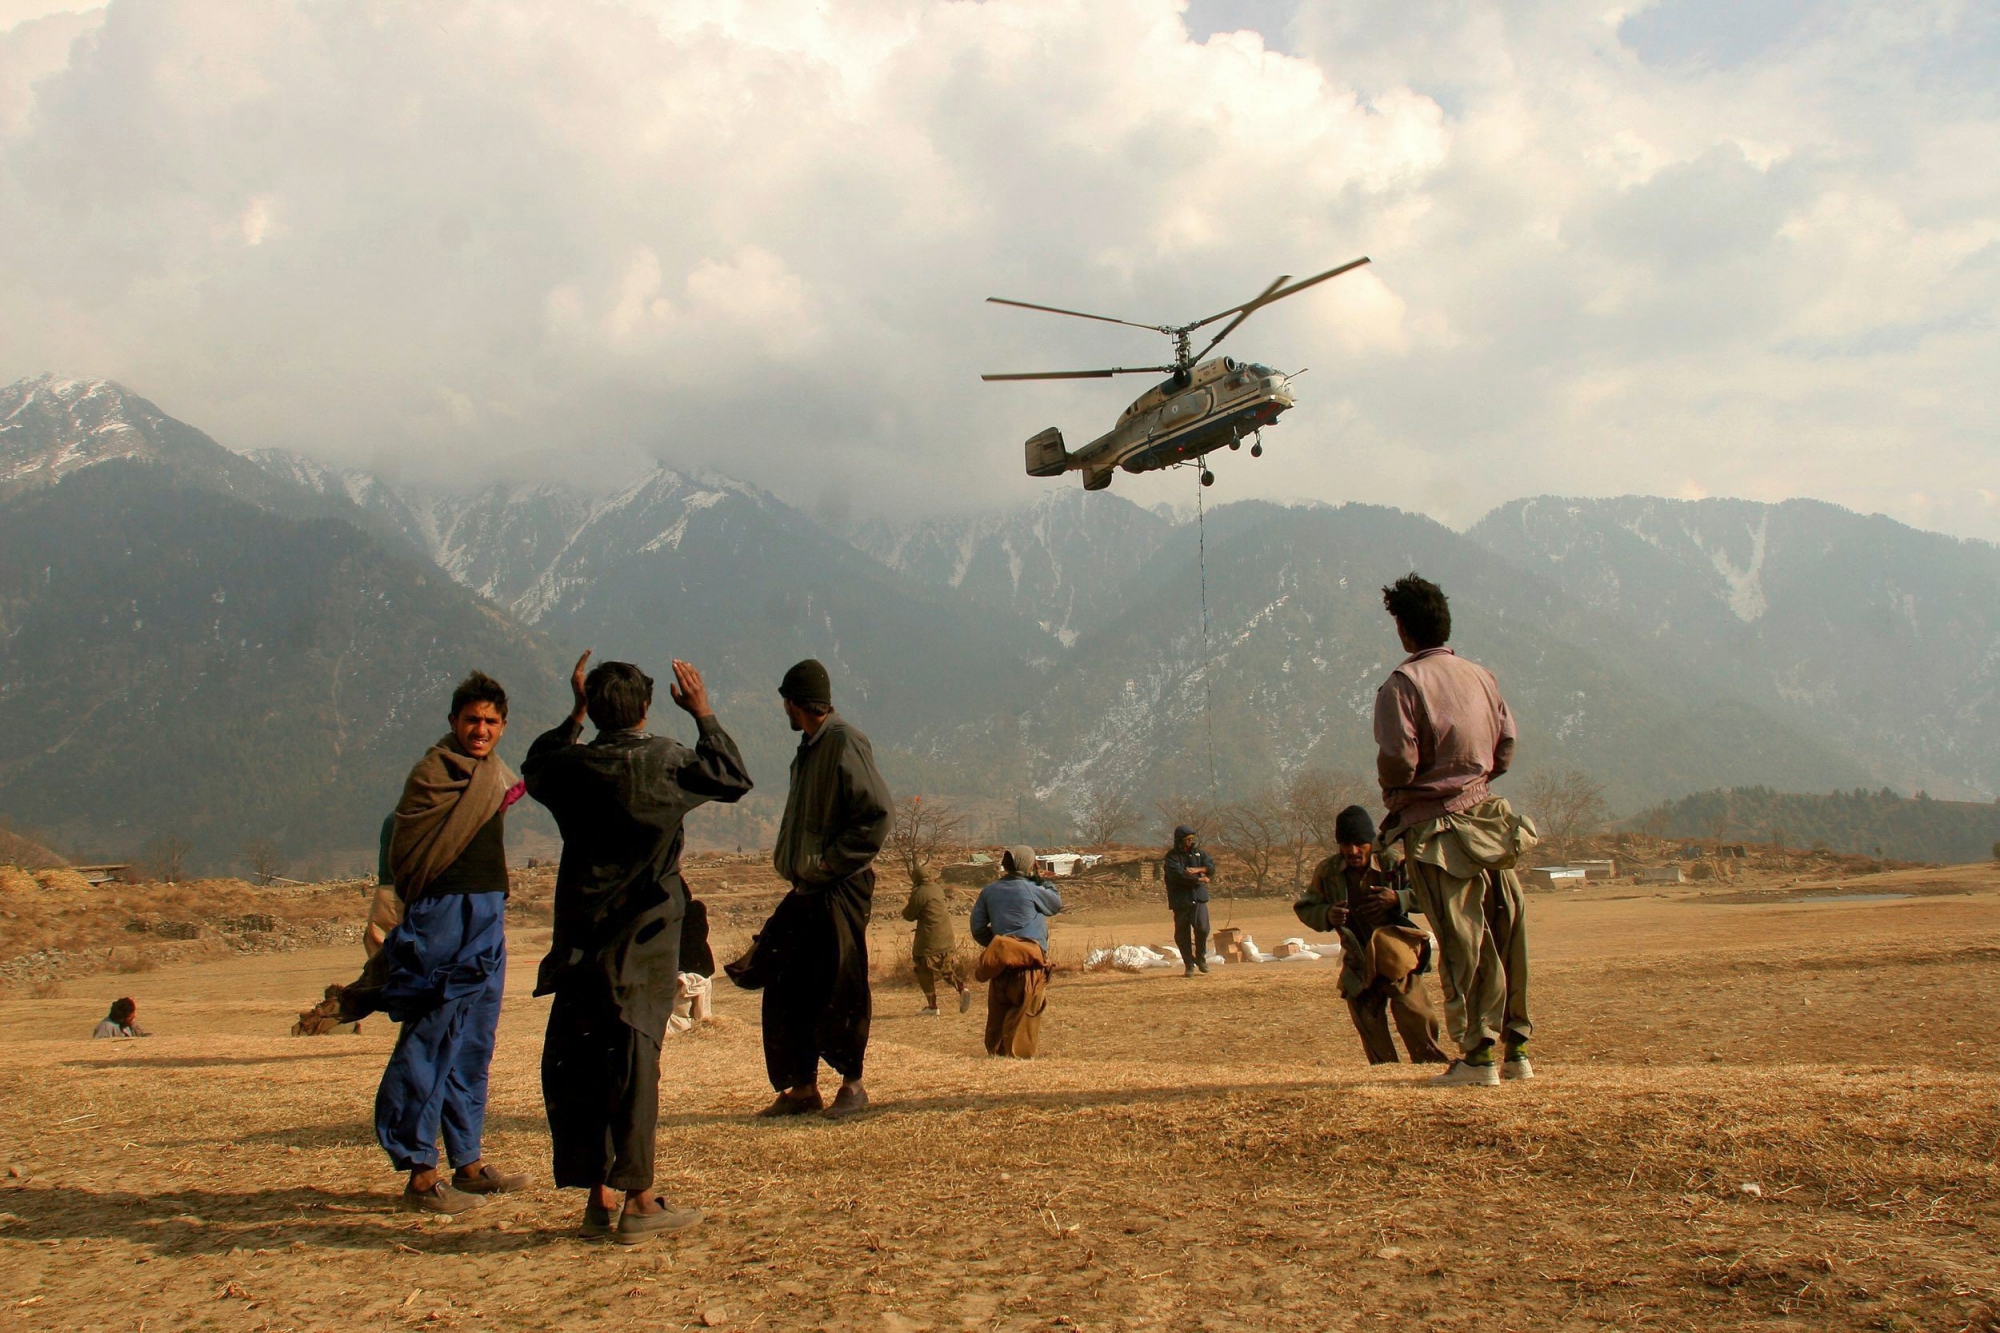 People watch a helicopter from the World Food Program arriving to the village of Paca Biakh in Allai Valley, 70km northwest of Muzaffarabad, Pakistan, Wednesday, Dec. 28, 2005. WFP is delivering food aid to remote villages in high altitude areas isolated by October's earthquake and providing medical care with a local NGO. (KEYSTONE/AP/Tomas Munita) PAKISTAN SOUTH ASIA EARTHQUAKE